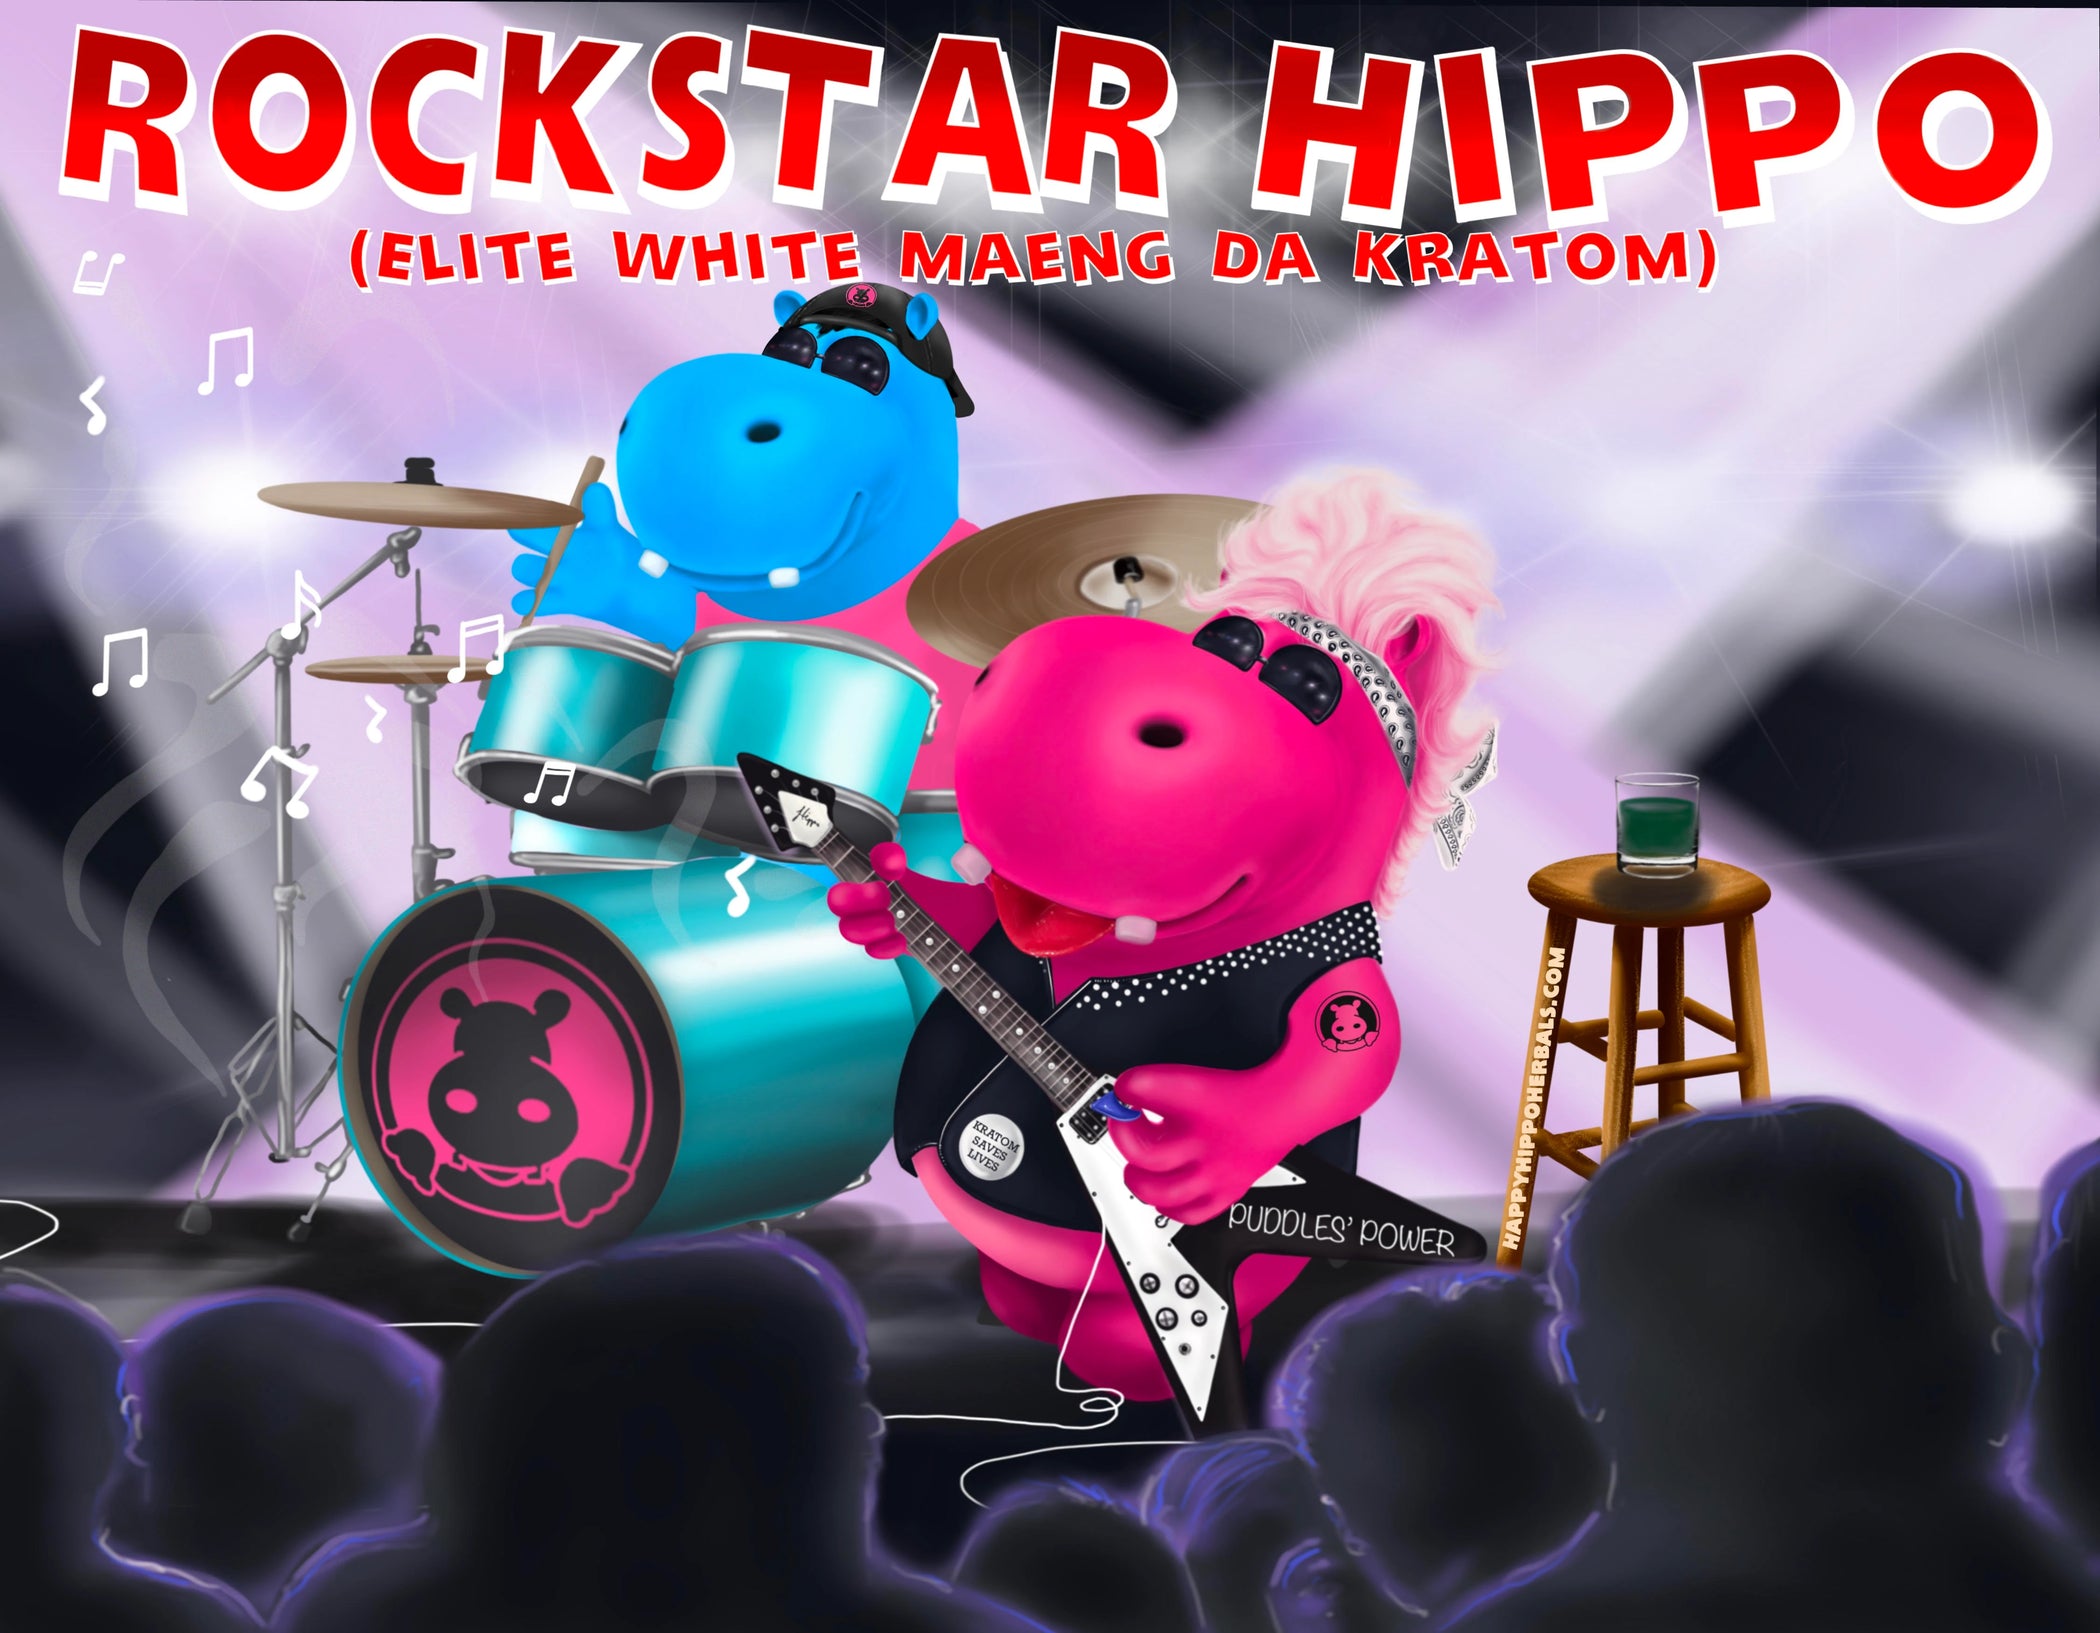 Graphic Designed image depicting Puddles the Hippo with a mohawk and guitar using White Maeng Da Kratom Powder (Rockstar Hippo), while feeling Super Energy kratom effects and playing in a rock band